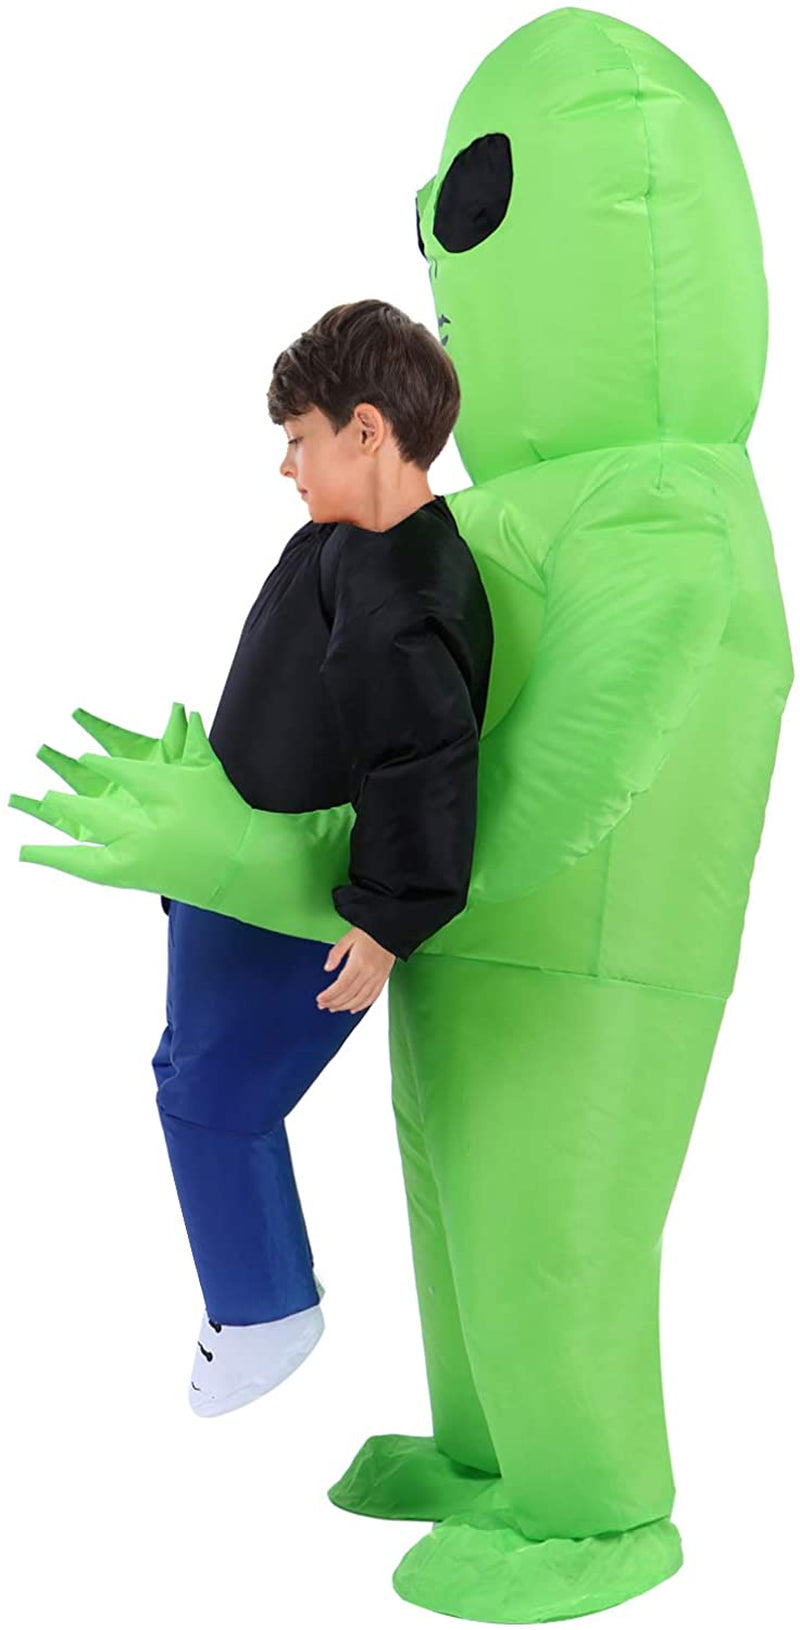 TOLOCO Inflatable Costume for Kid, Inflatable Alien Costume Kids, Alien Holding Person Costume, Halloween Blow up Costume  TOLOCO   